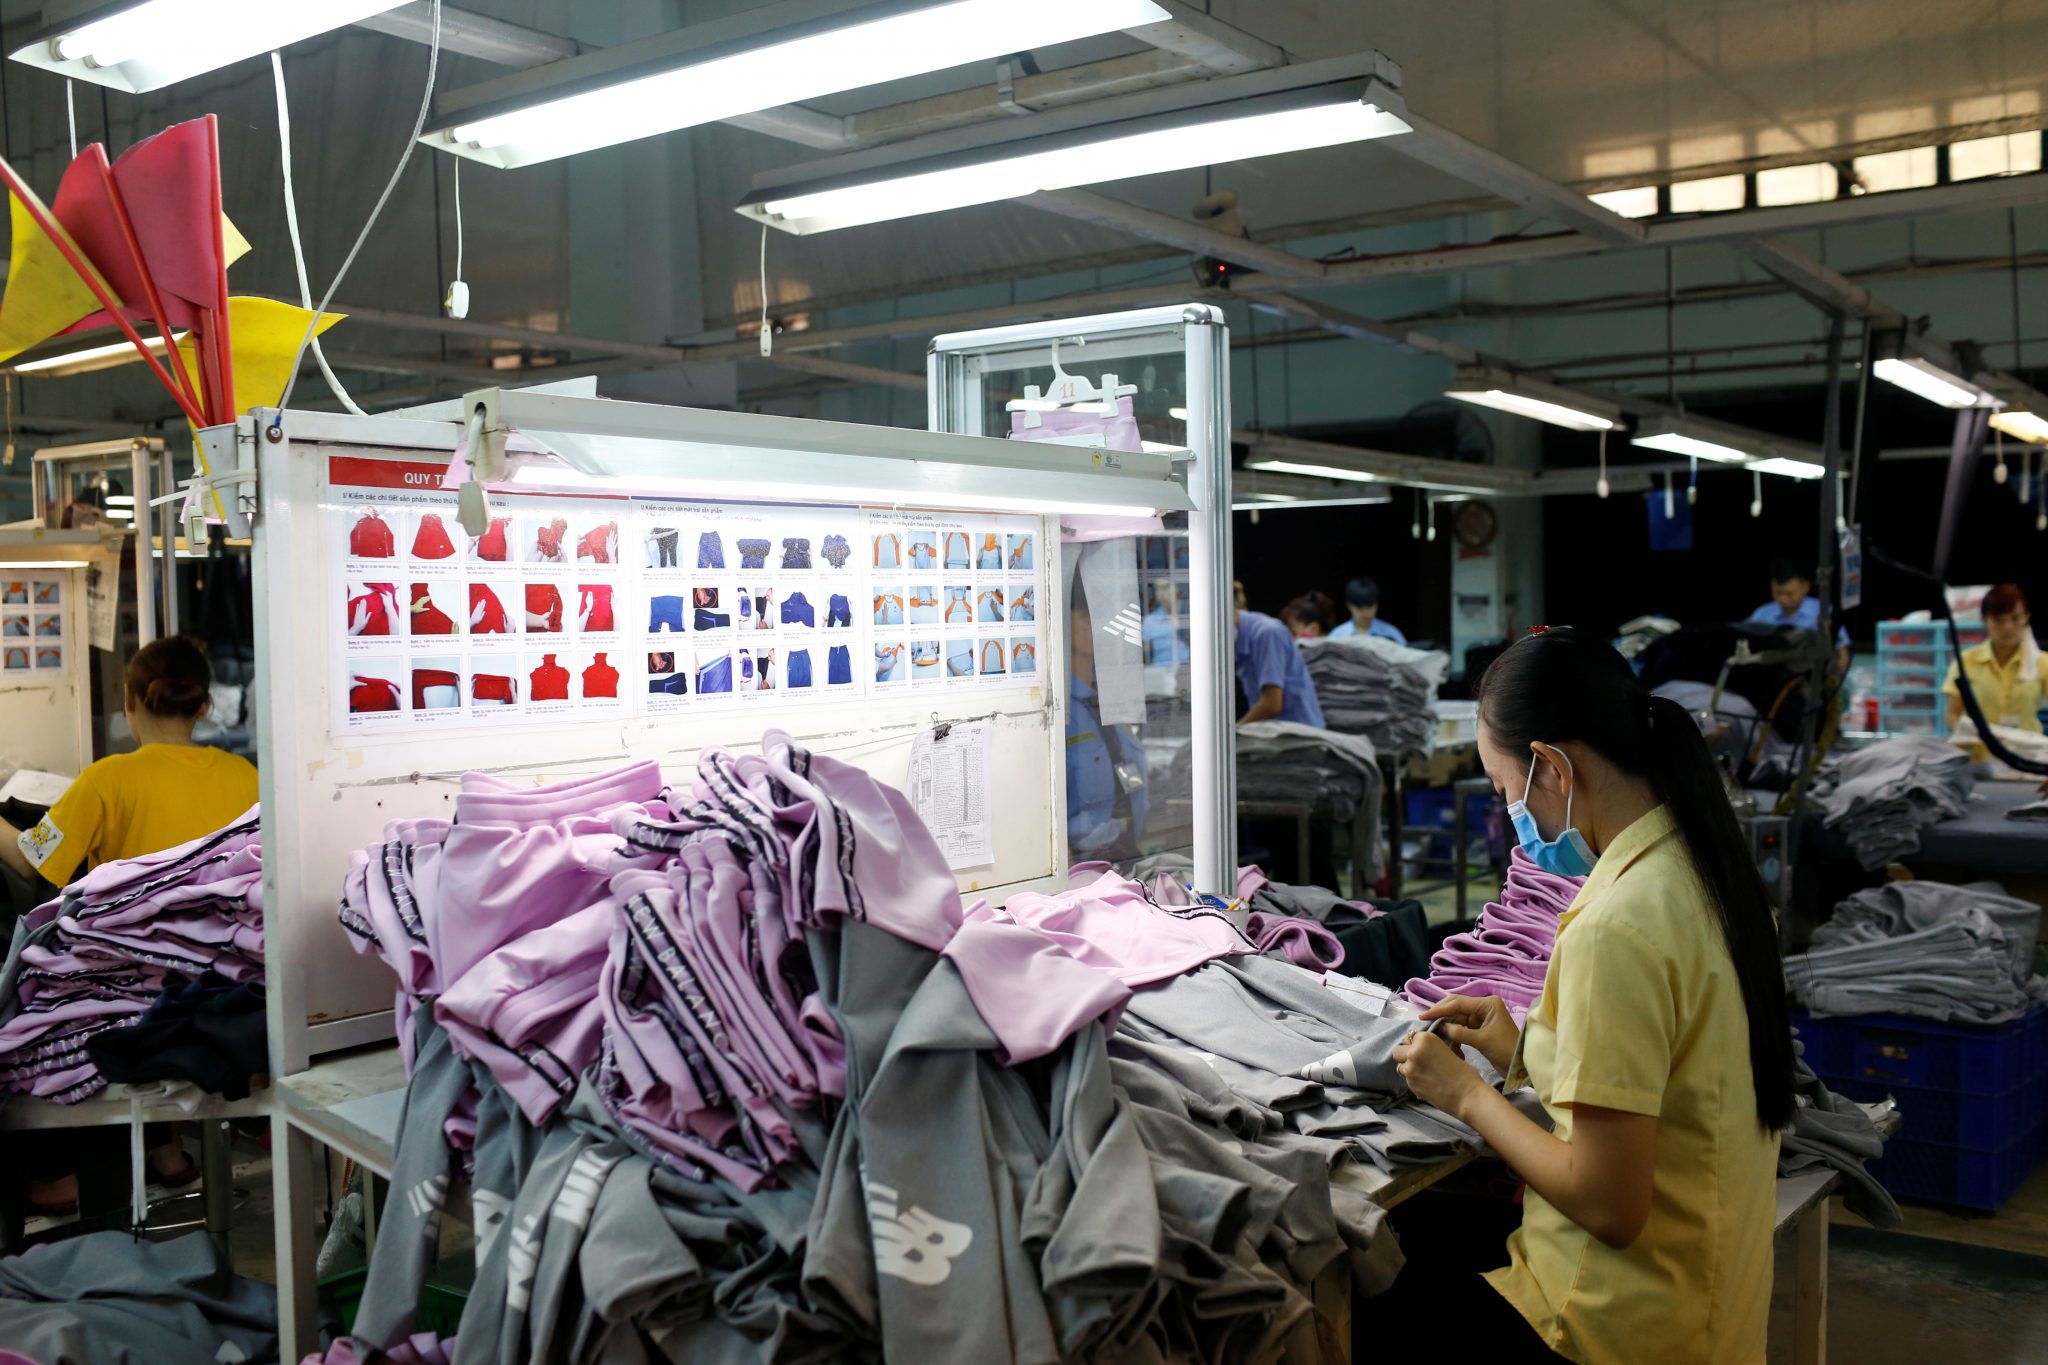 Vietnam's textile and garment industry hit hard by COVID-19 | East Asia Forum